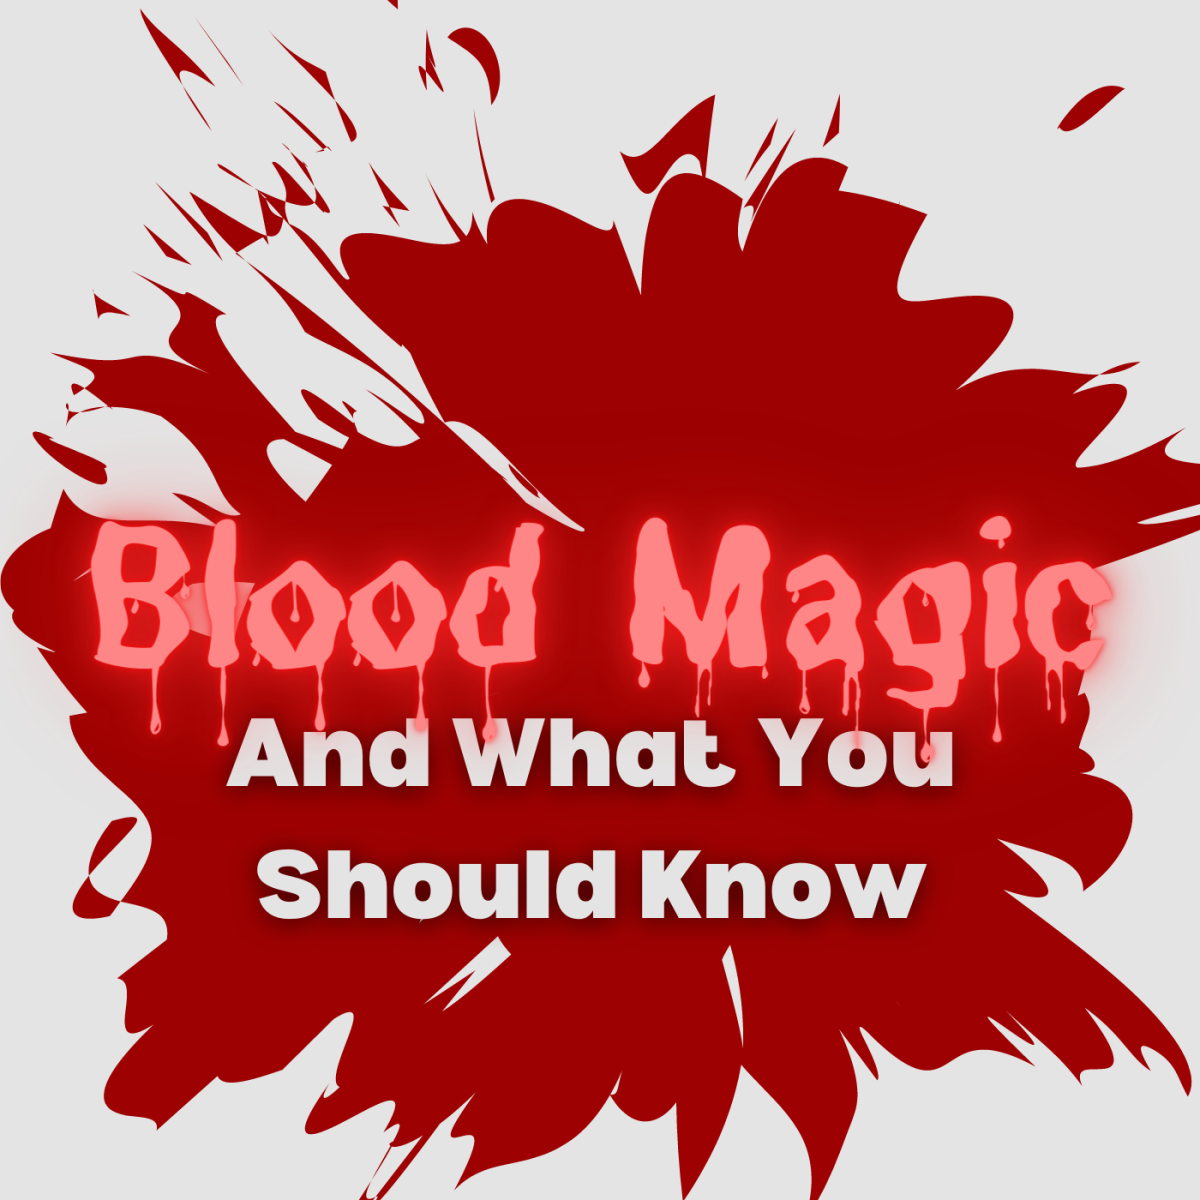 Read on to learn everything you need to know about how to perform blood magic safely. 